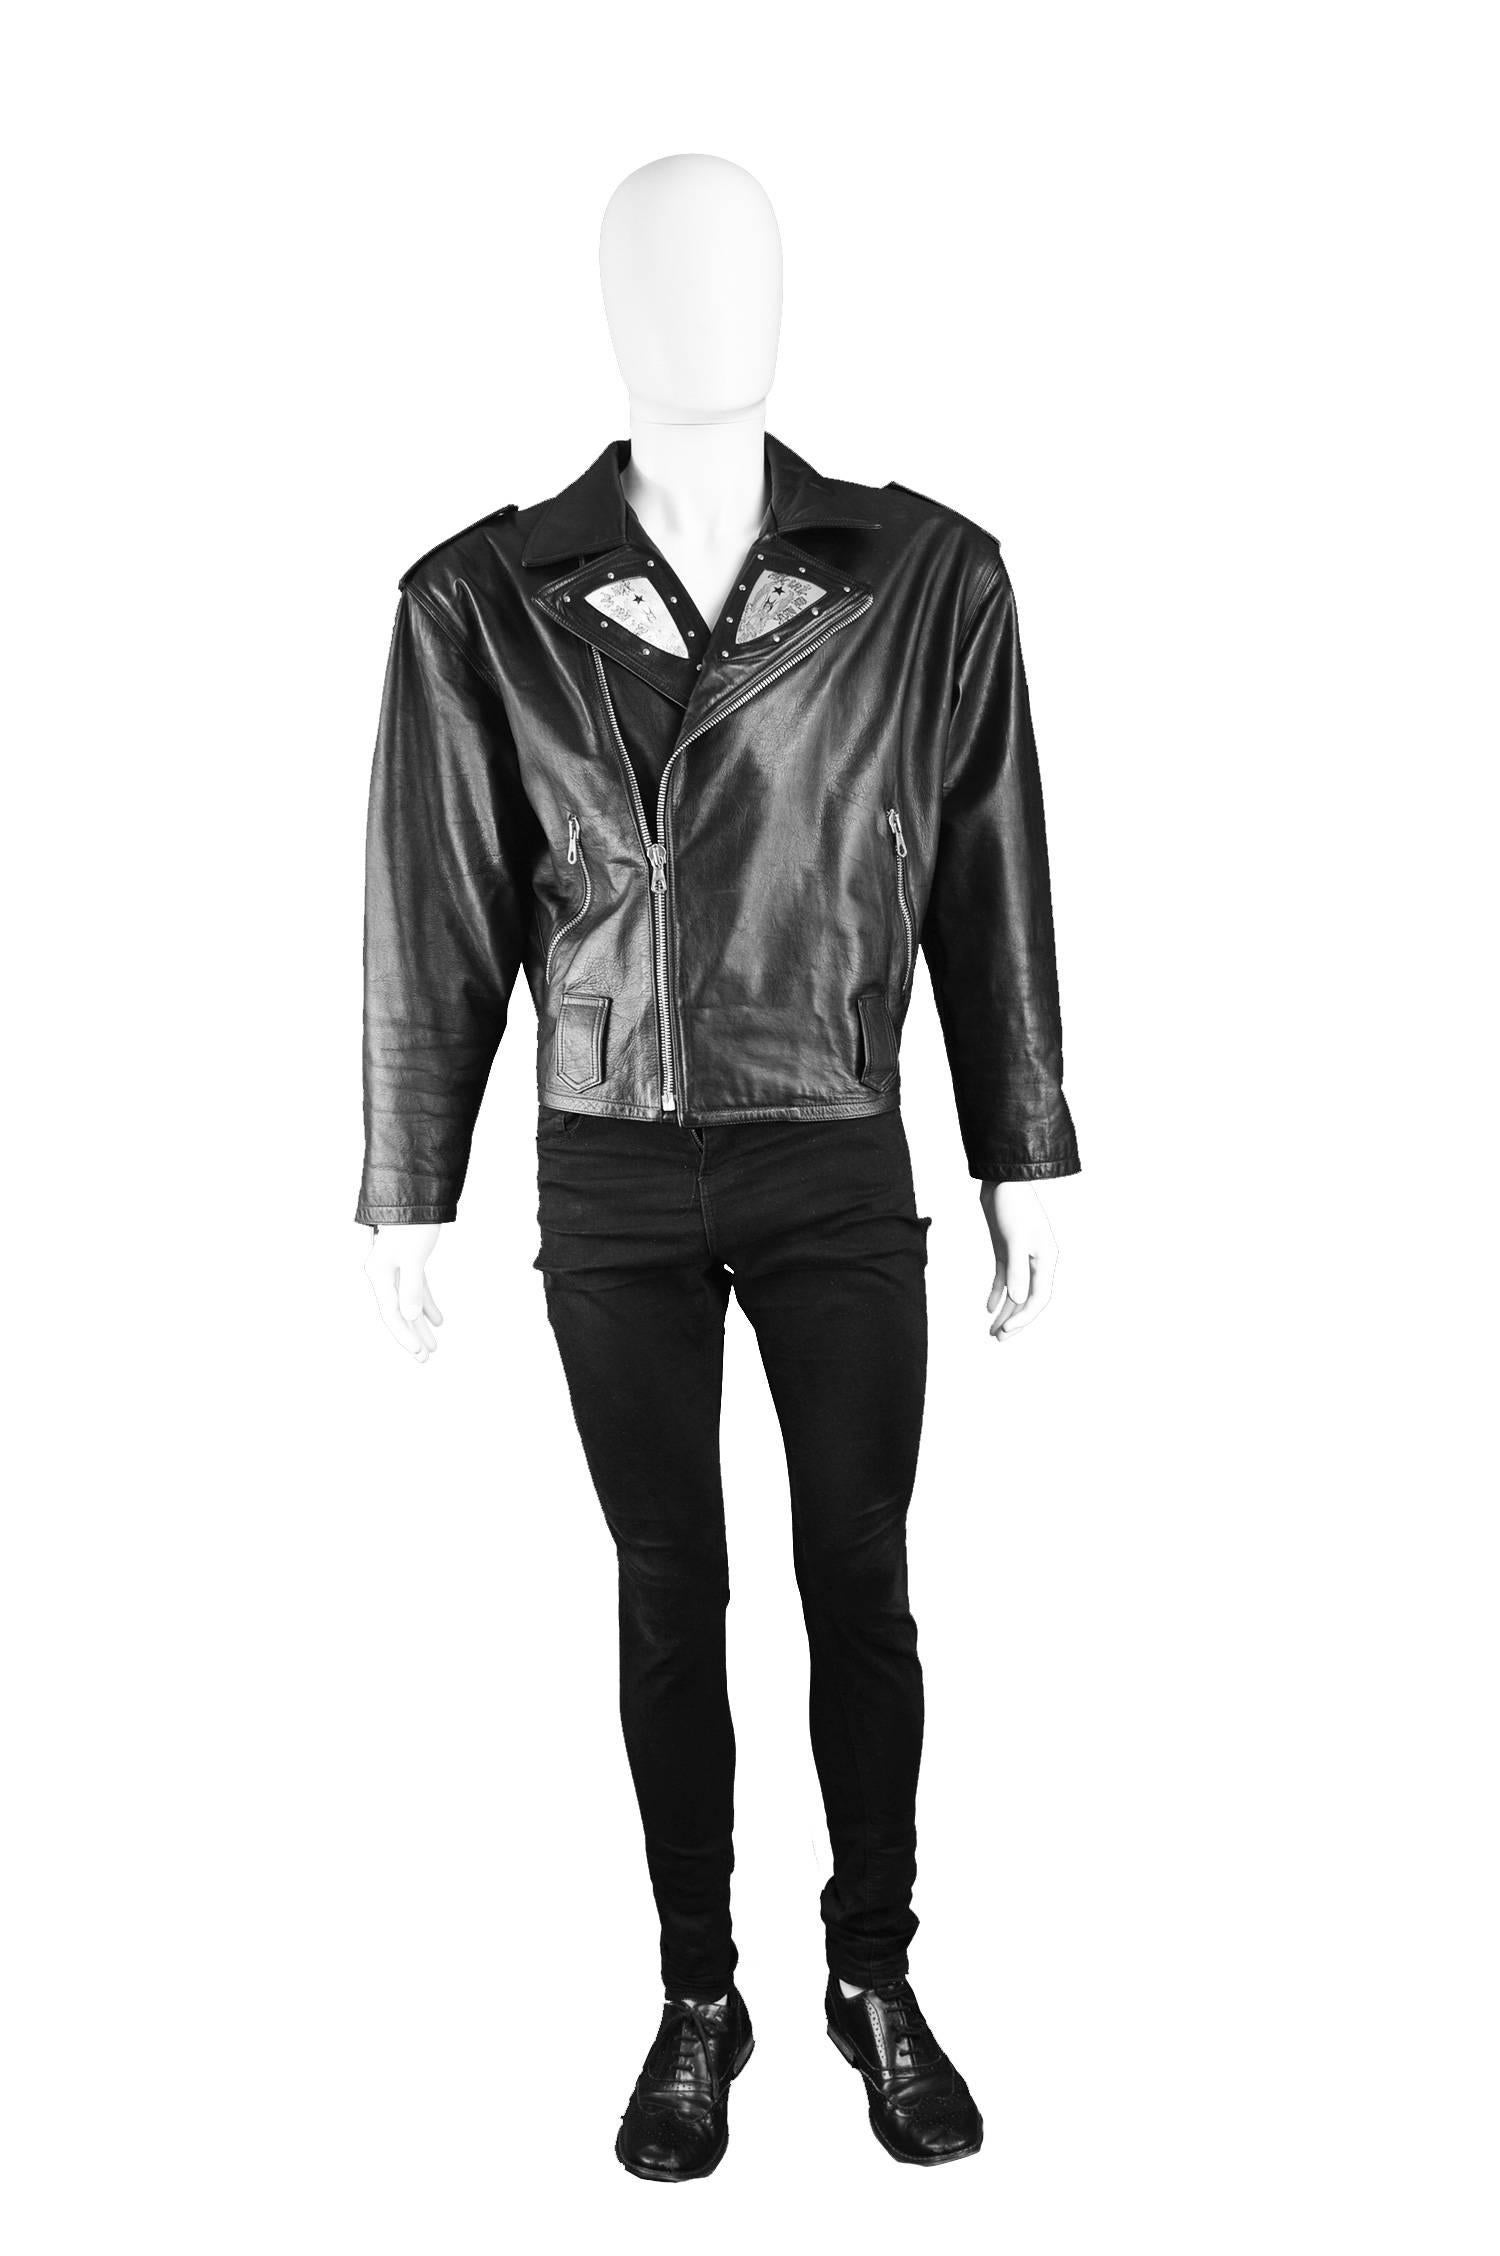 An absolutely incredible vintage mens leather jacket from the 80s by the genius Italian designer duo, Calugi e Giannelli from the 'Violent Angels' fall / winter collection 1988. Perfect for menswear collectors this amazing piece is in a black